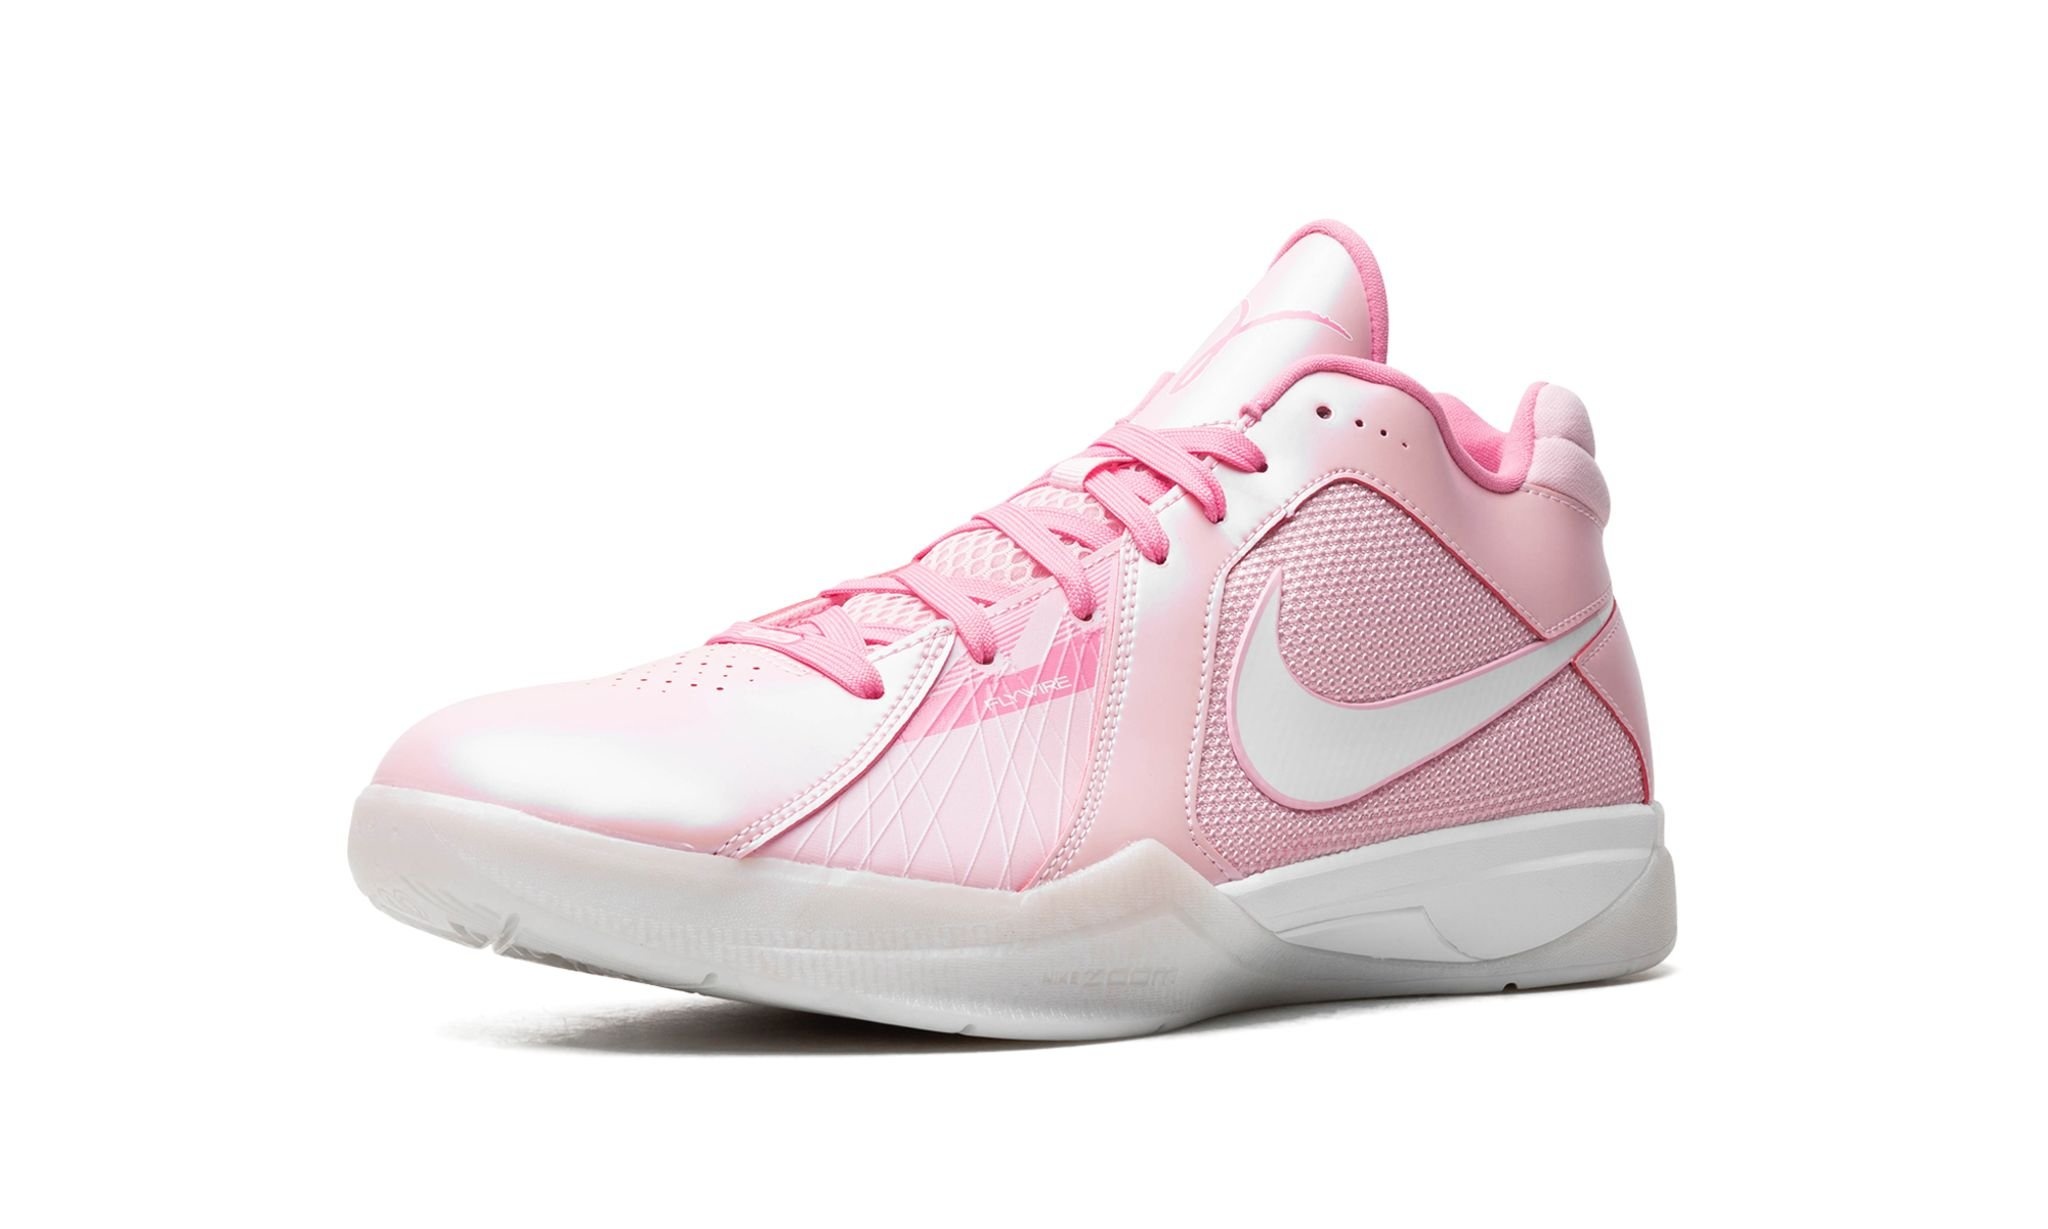 KD 3 "Aunt Pearl" - 4